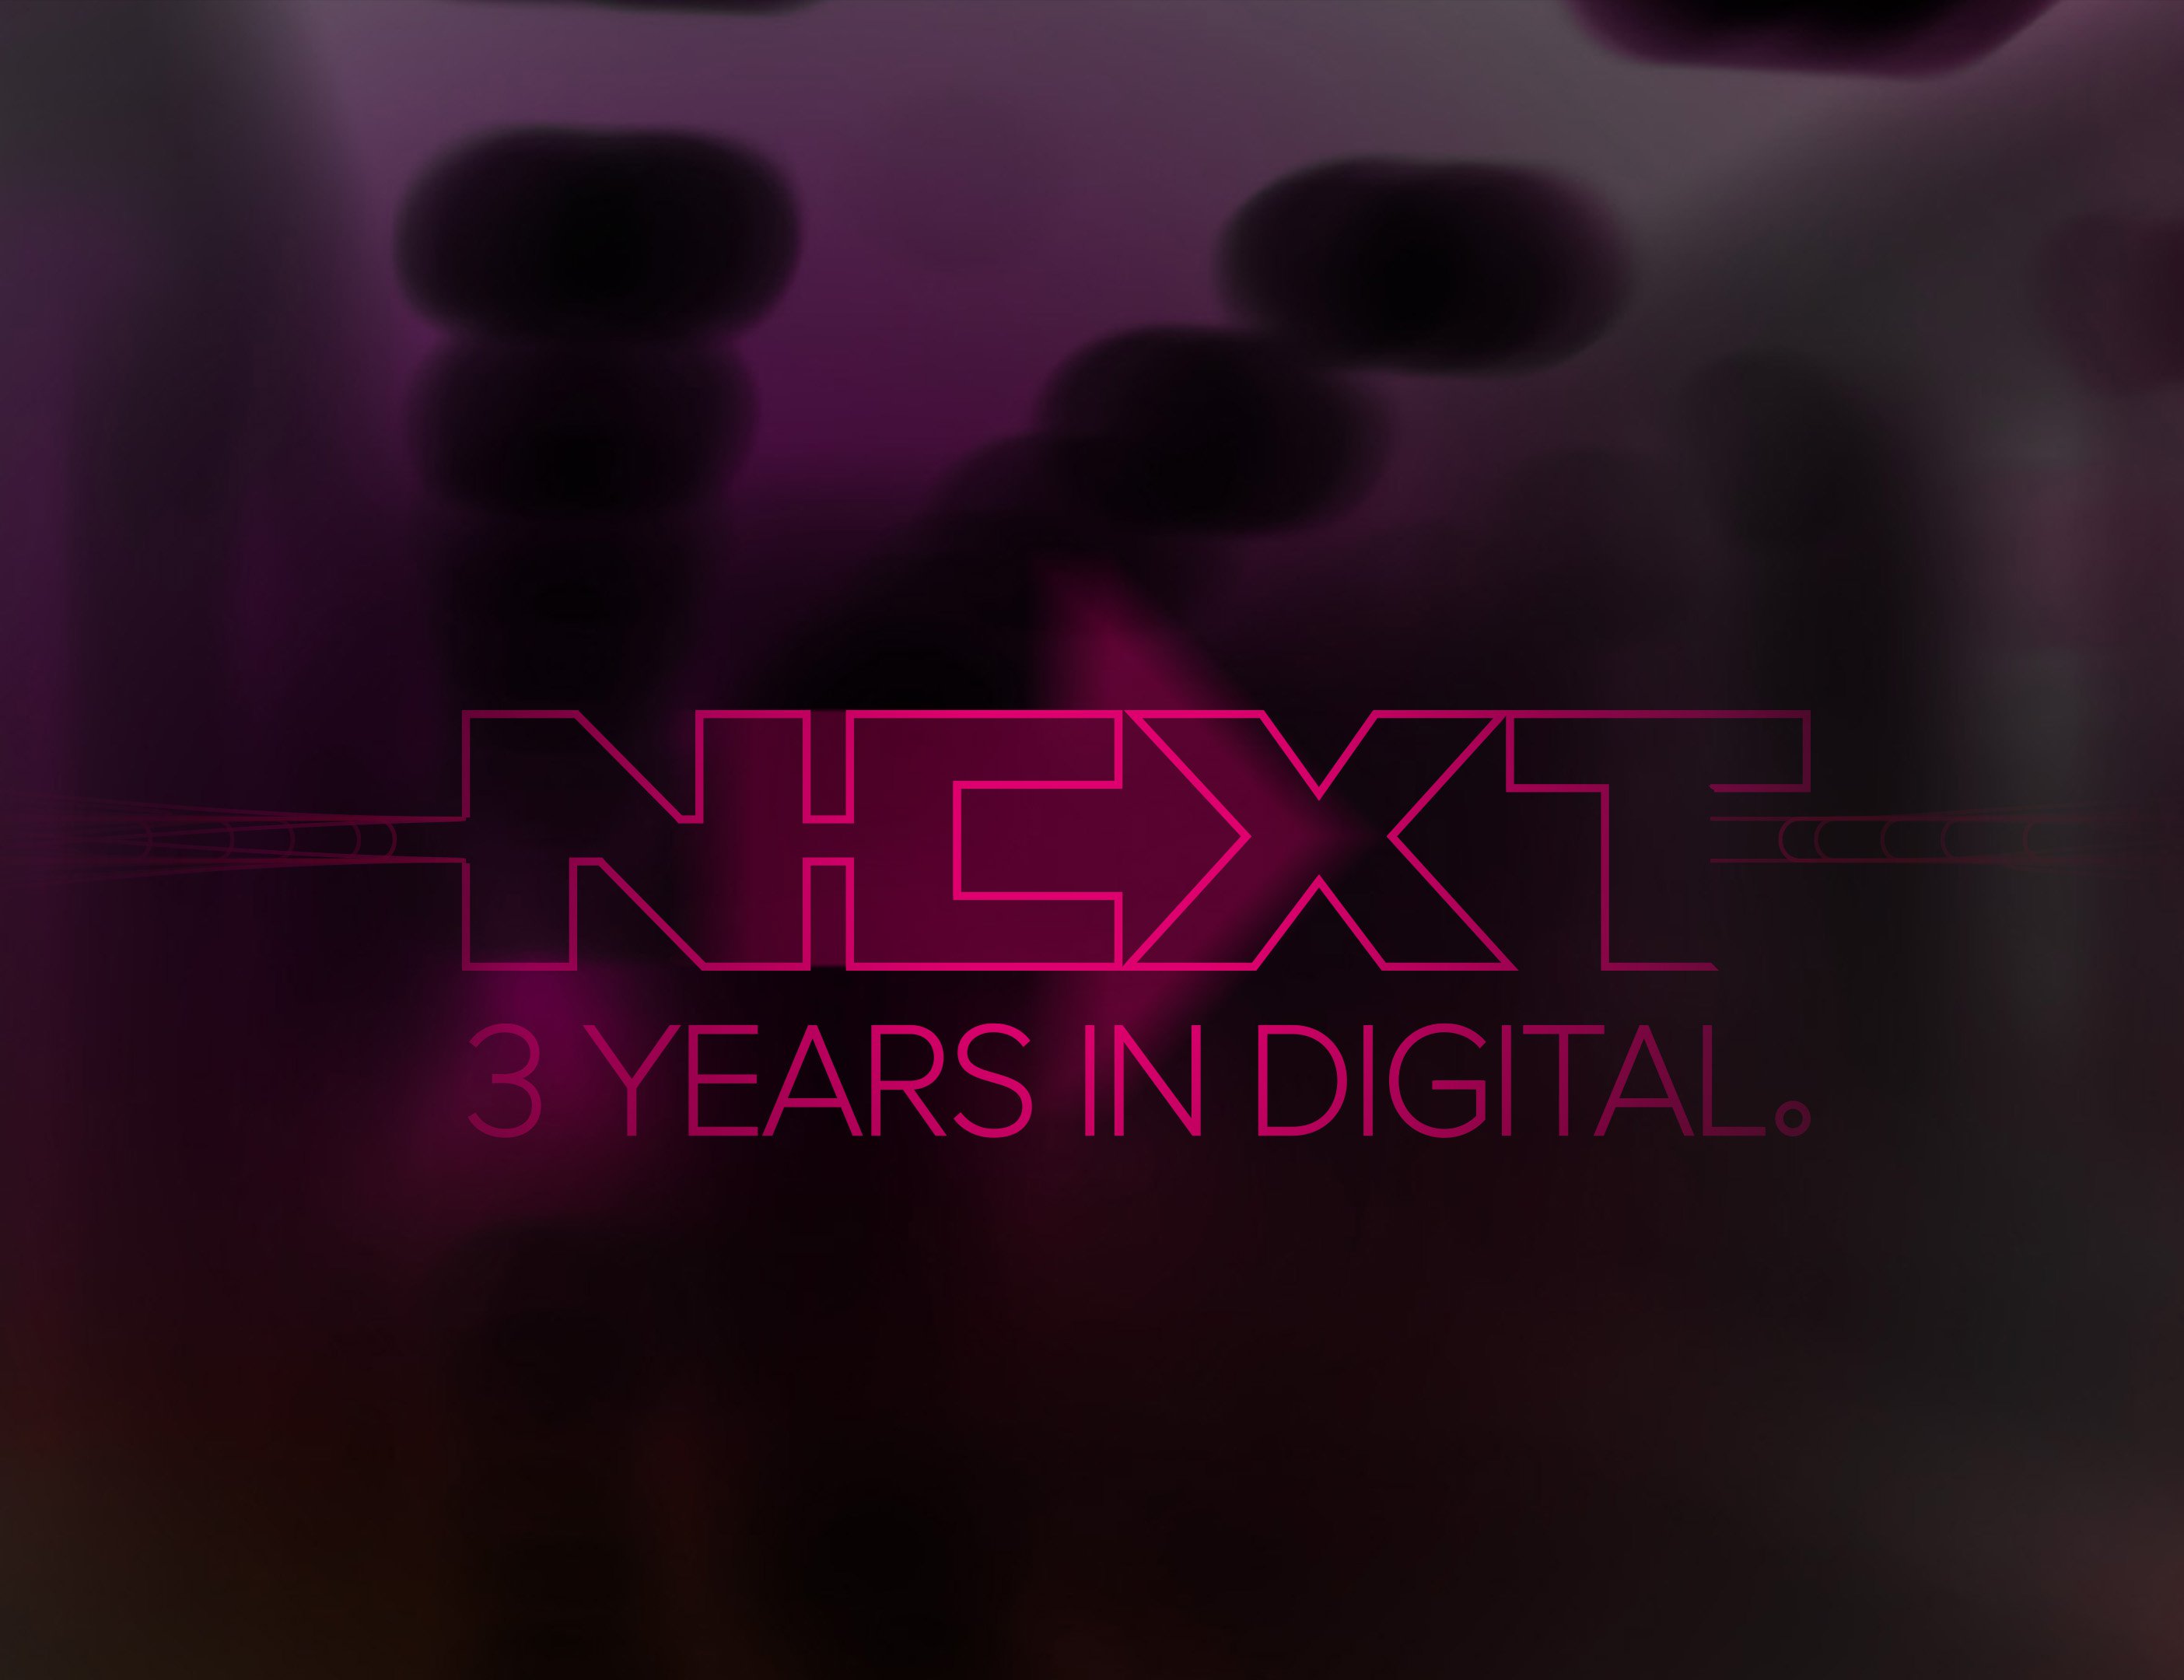 Next 3 Years in Digital Event